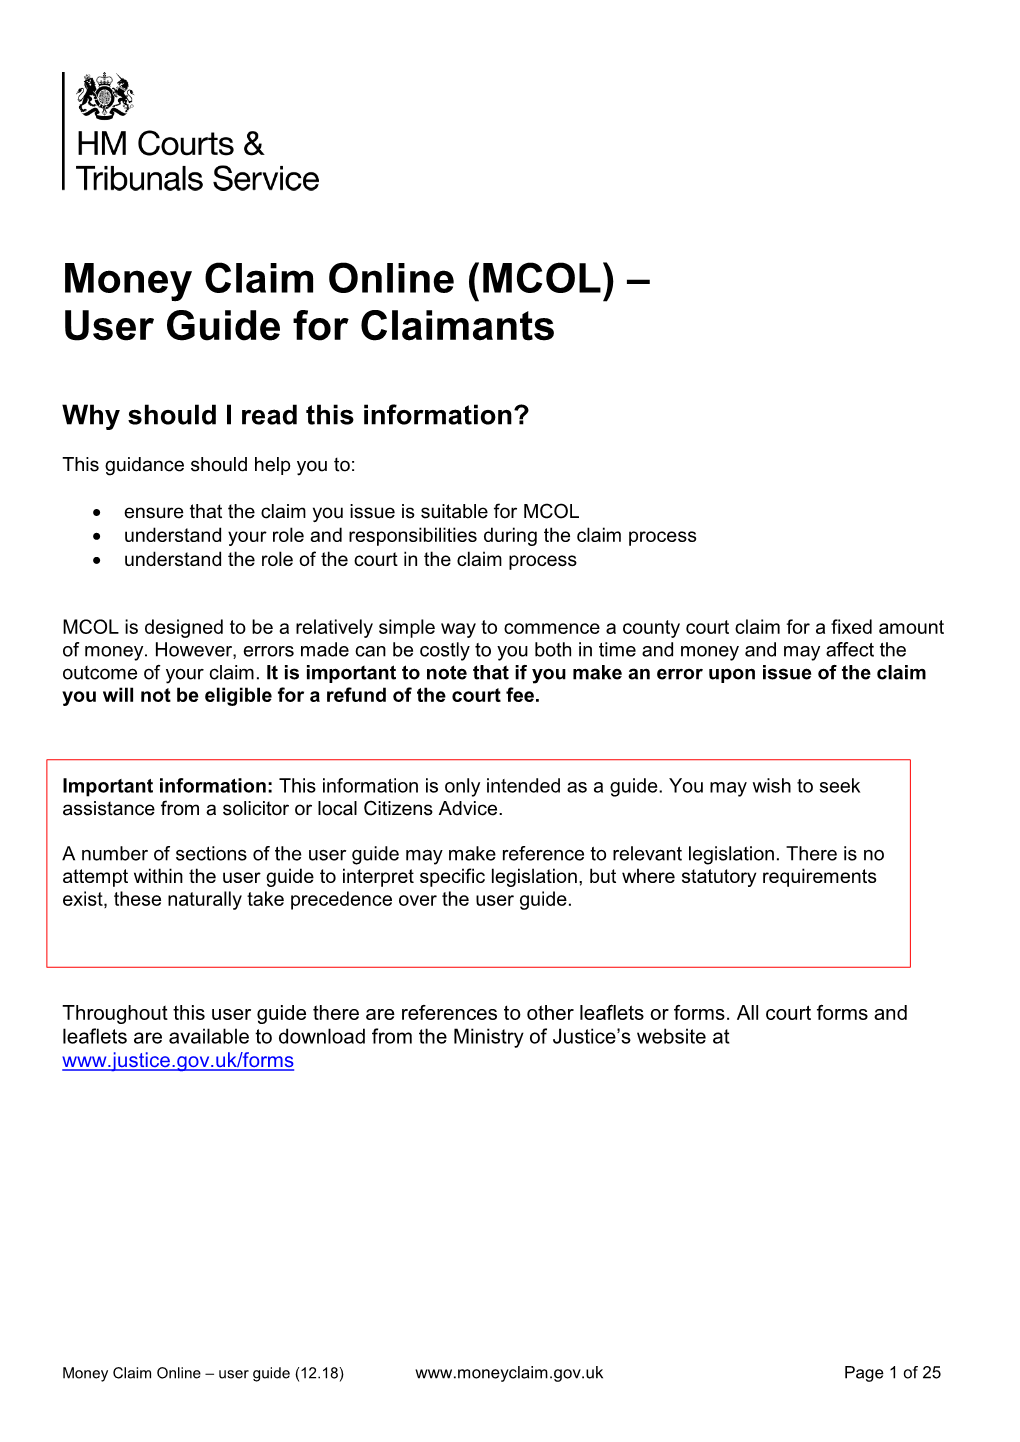 Money Claim Online (MCOL) – User Guide for Claimants